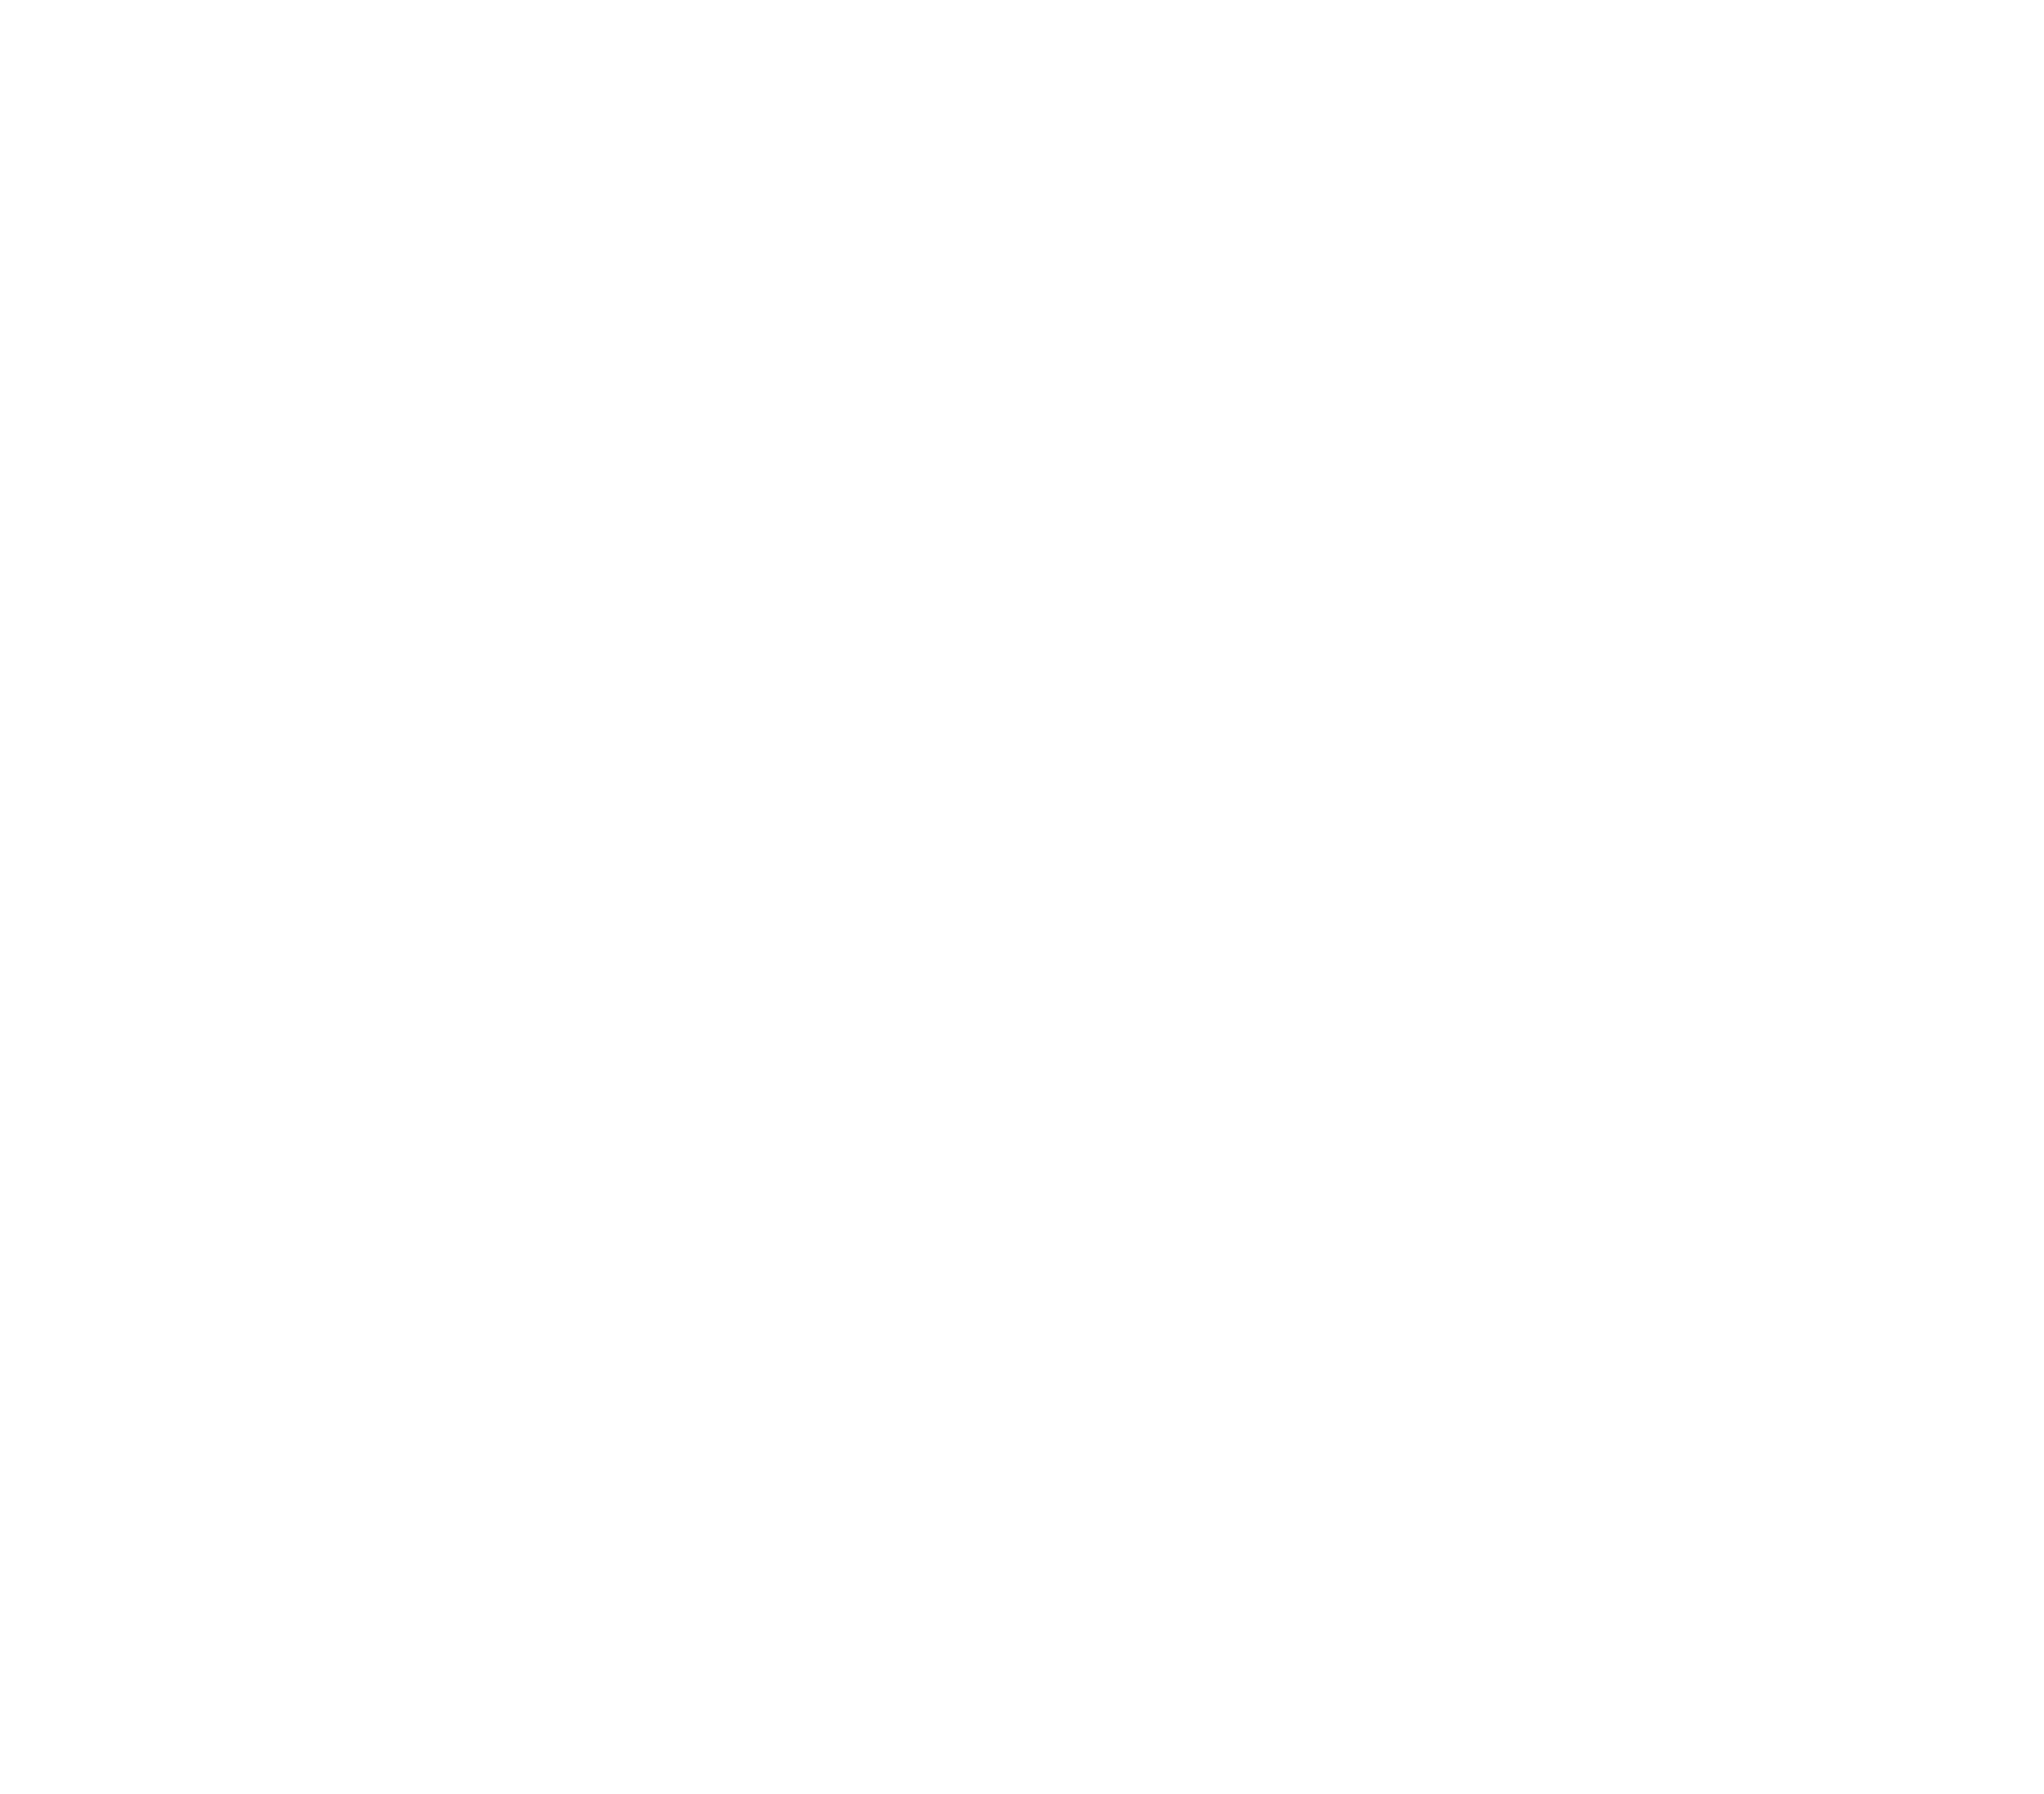 Barracuda Public Replationships a proud sponsor of Chica Chat Beyond Conference